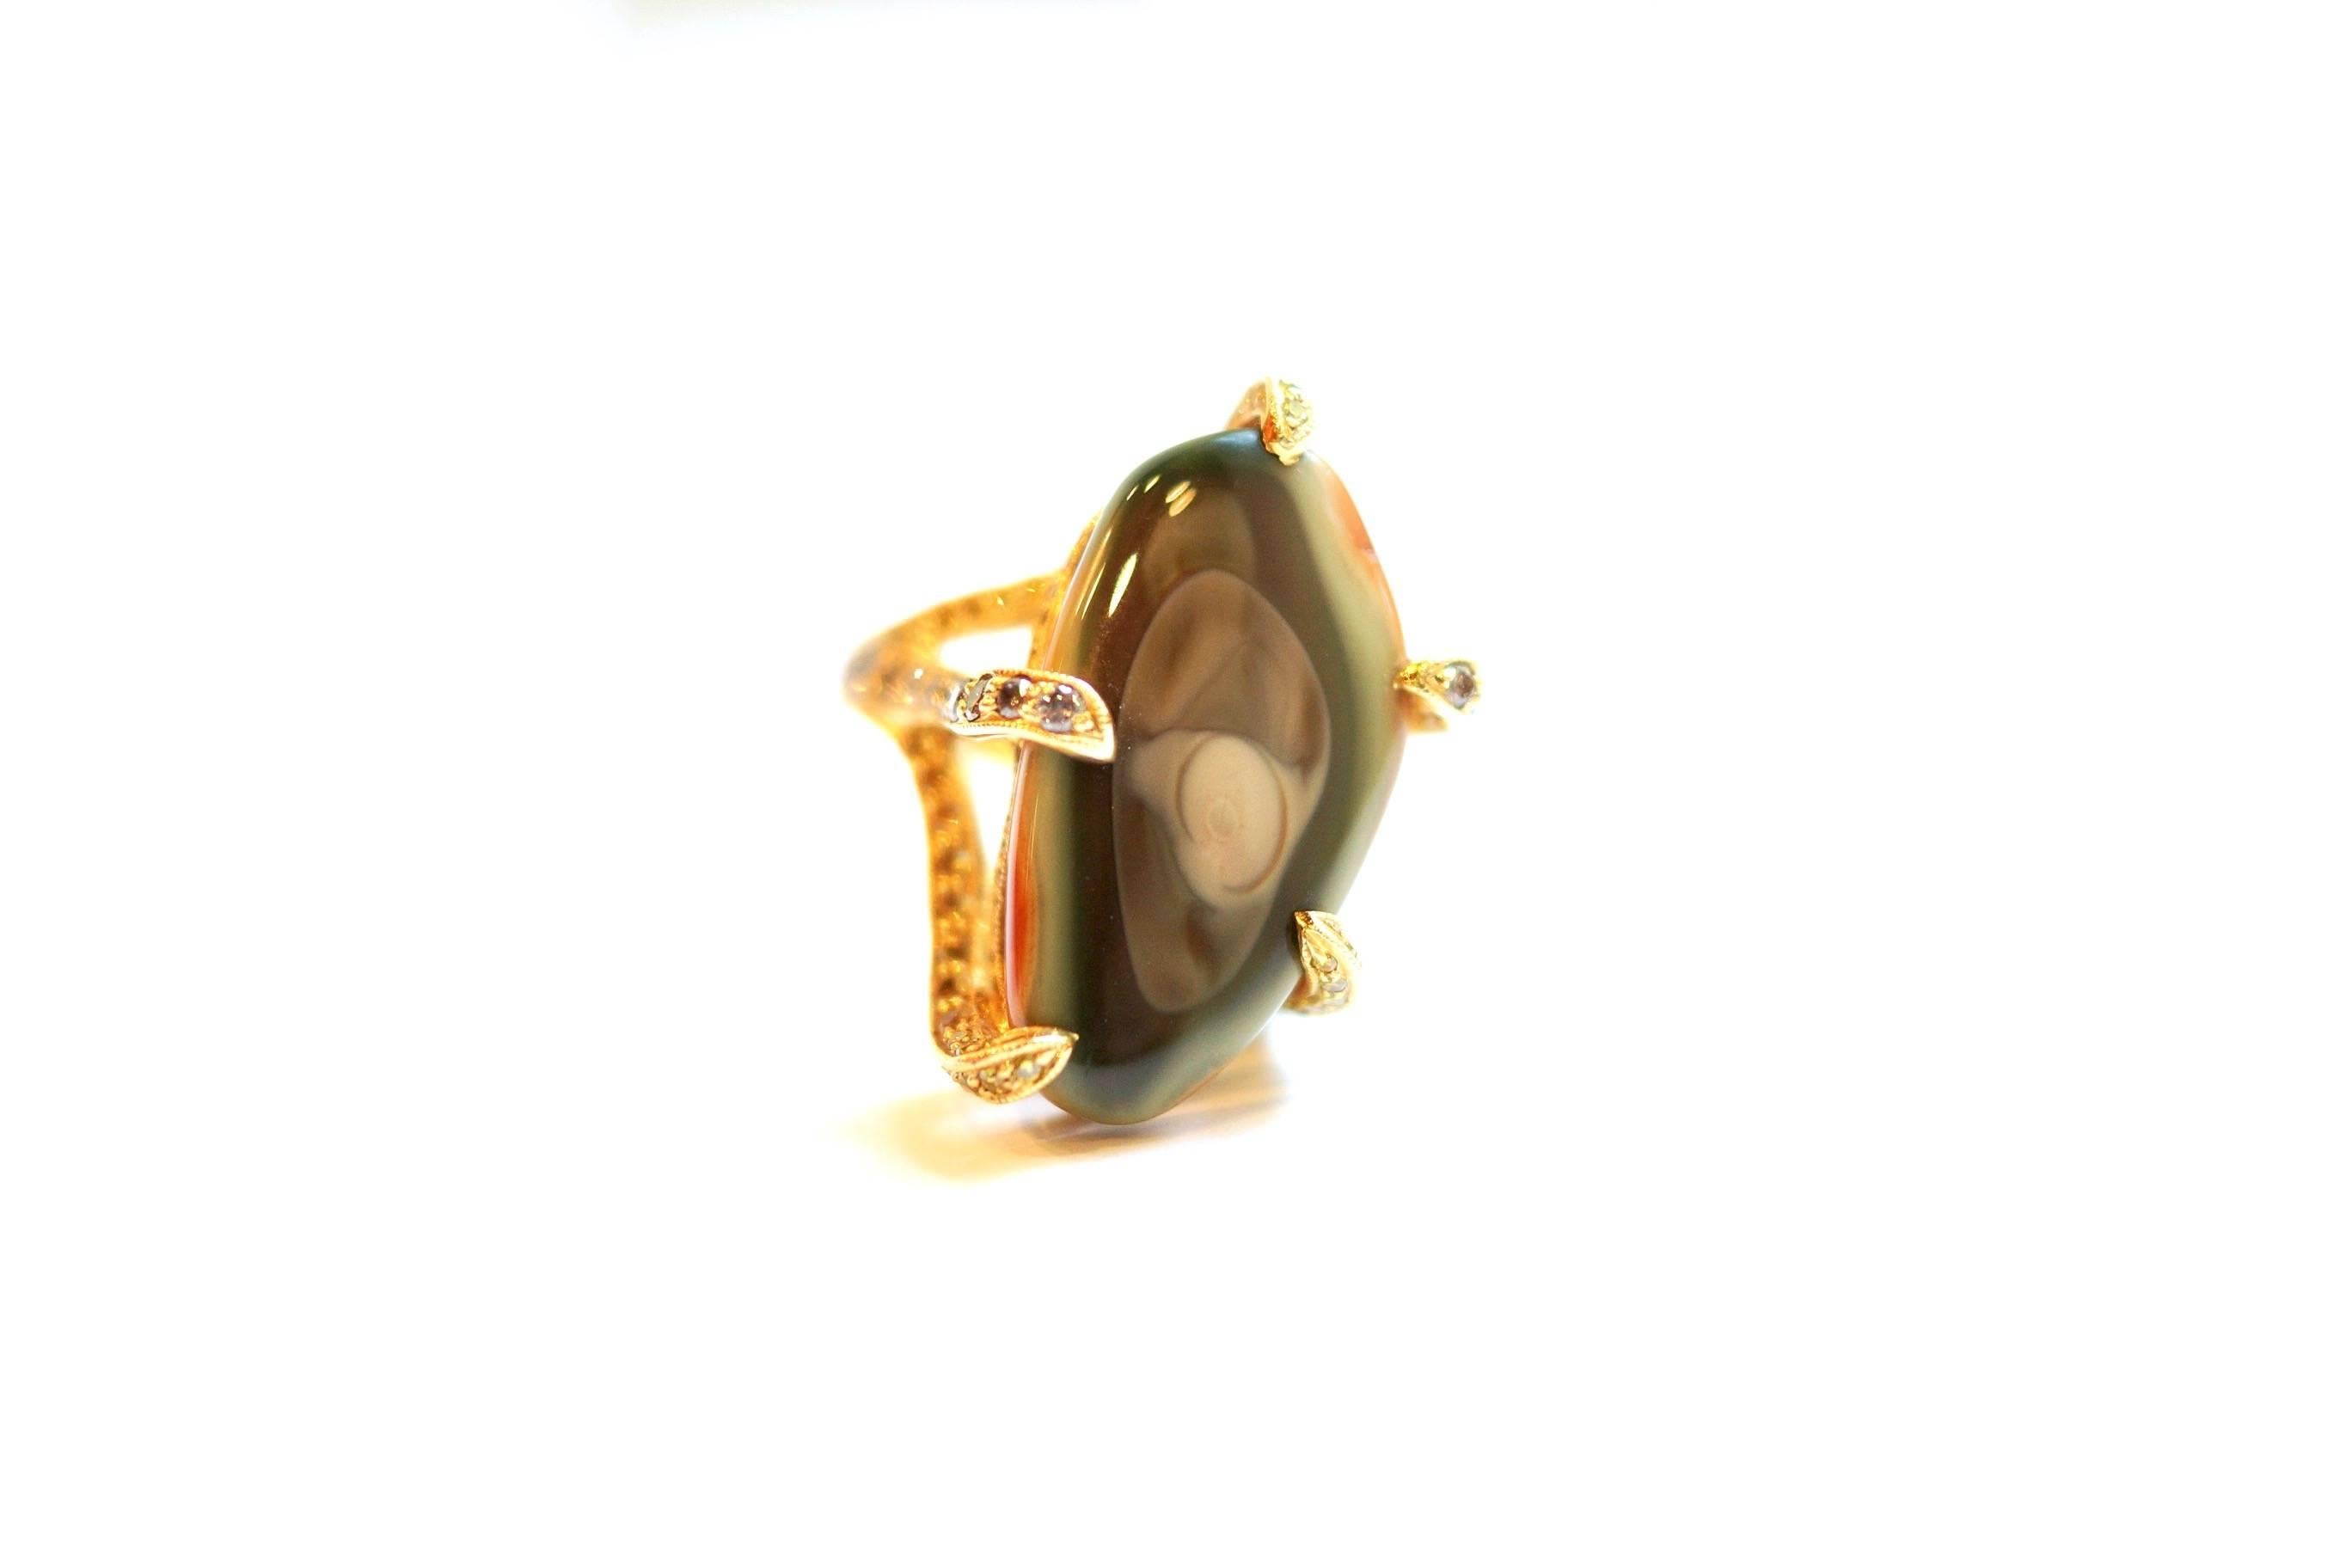 Imperial Ring
An unusually shaped imperial jasper set with intertwined tentacles of citrine, grey diamond, peridot, yellow sapphire and yellow diamond, handmade entirely in eighteen-karat yellow gold.
Size 7 - adjustable upon request
Imperial Jasper